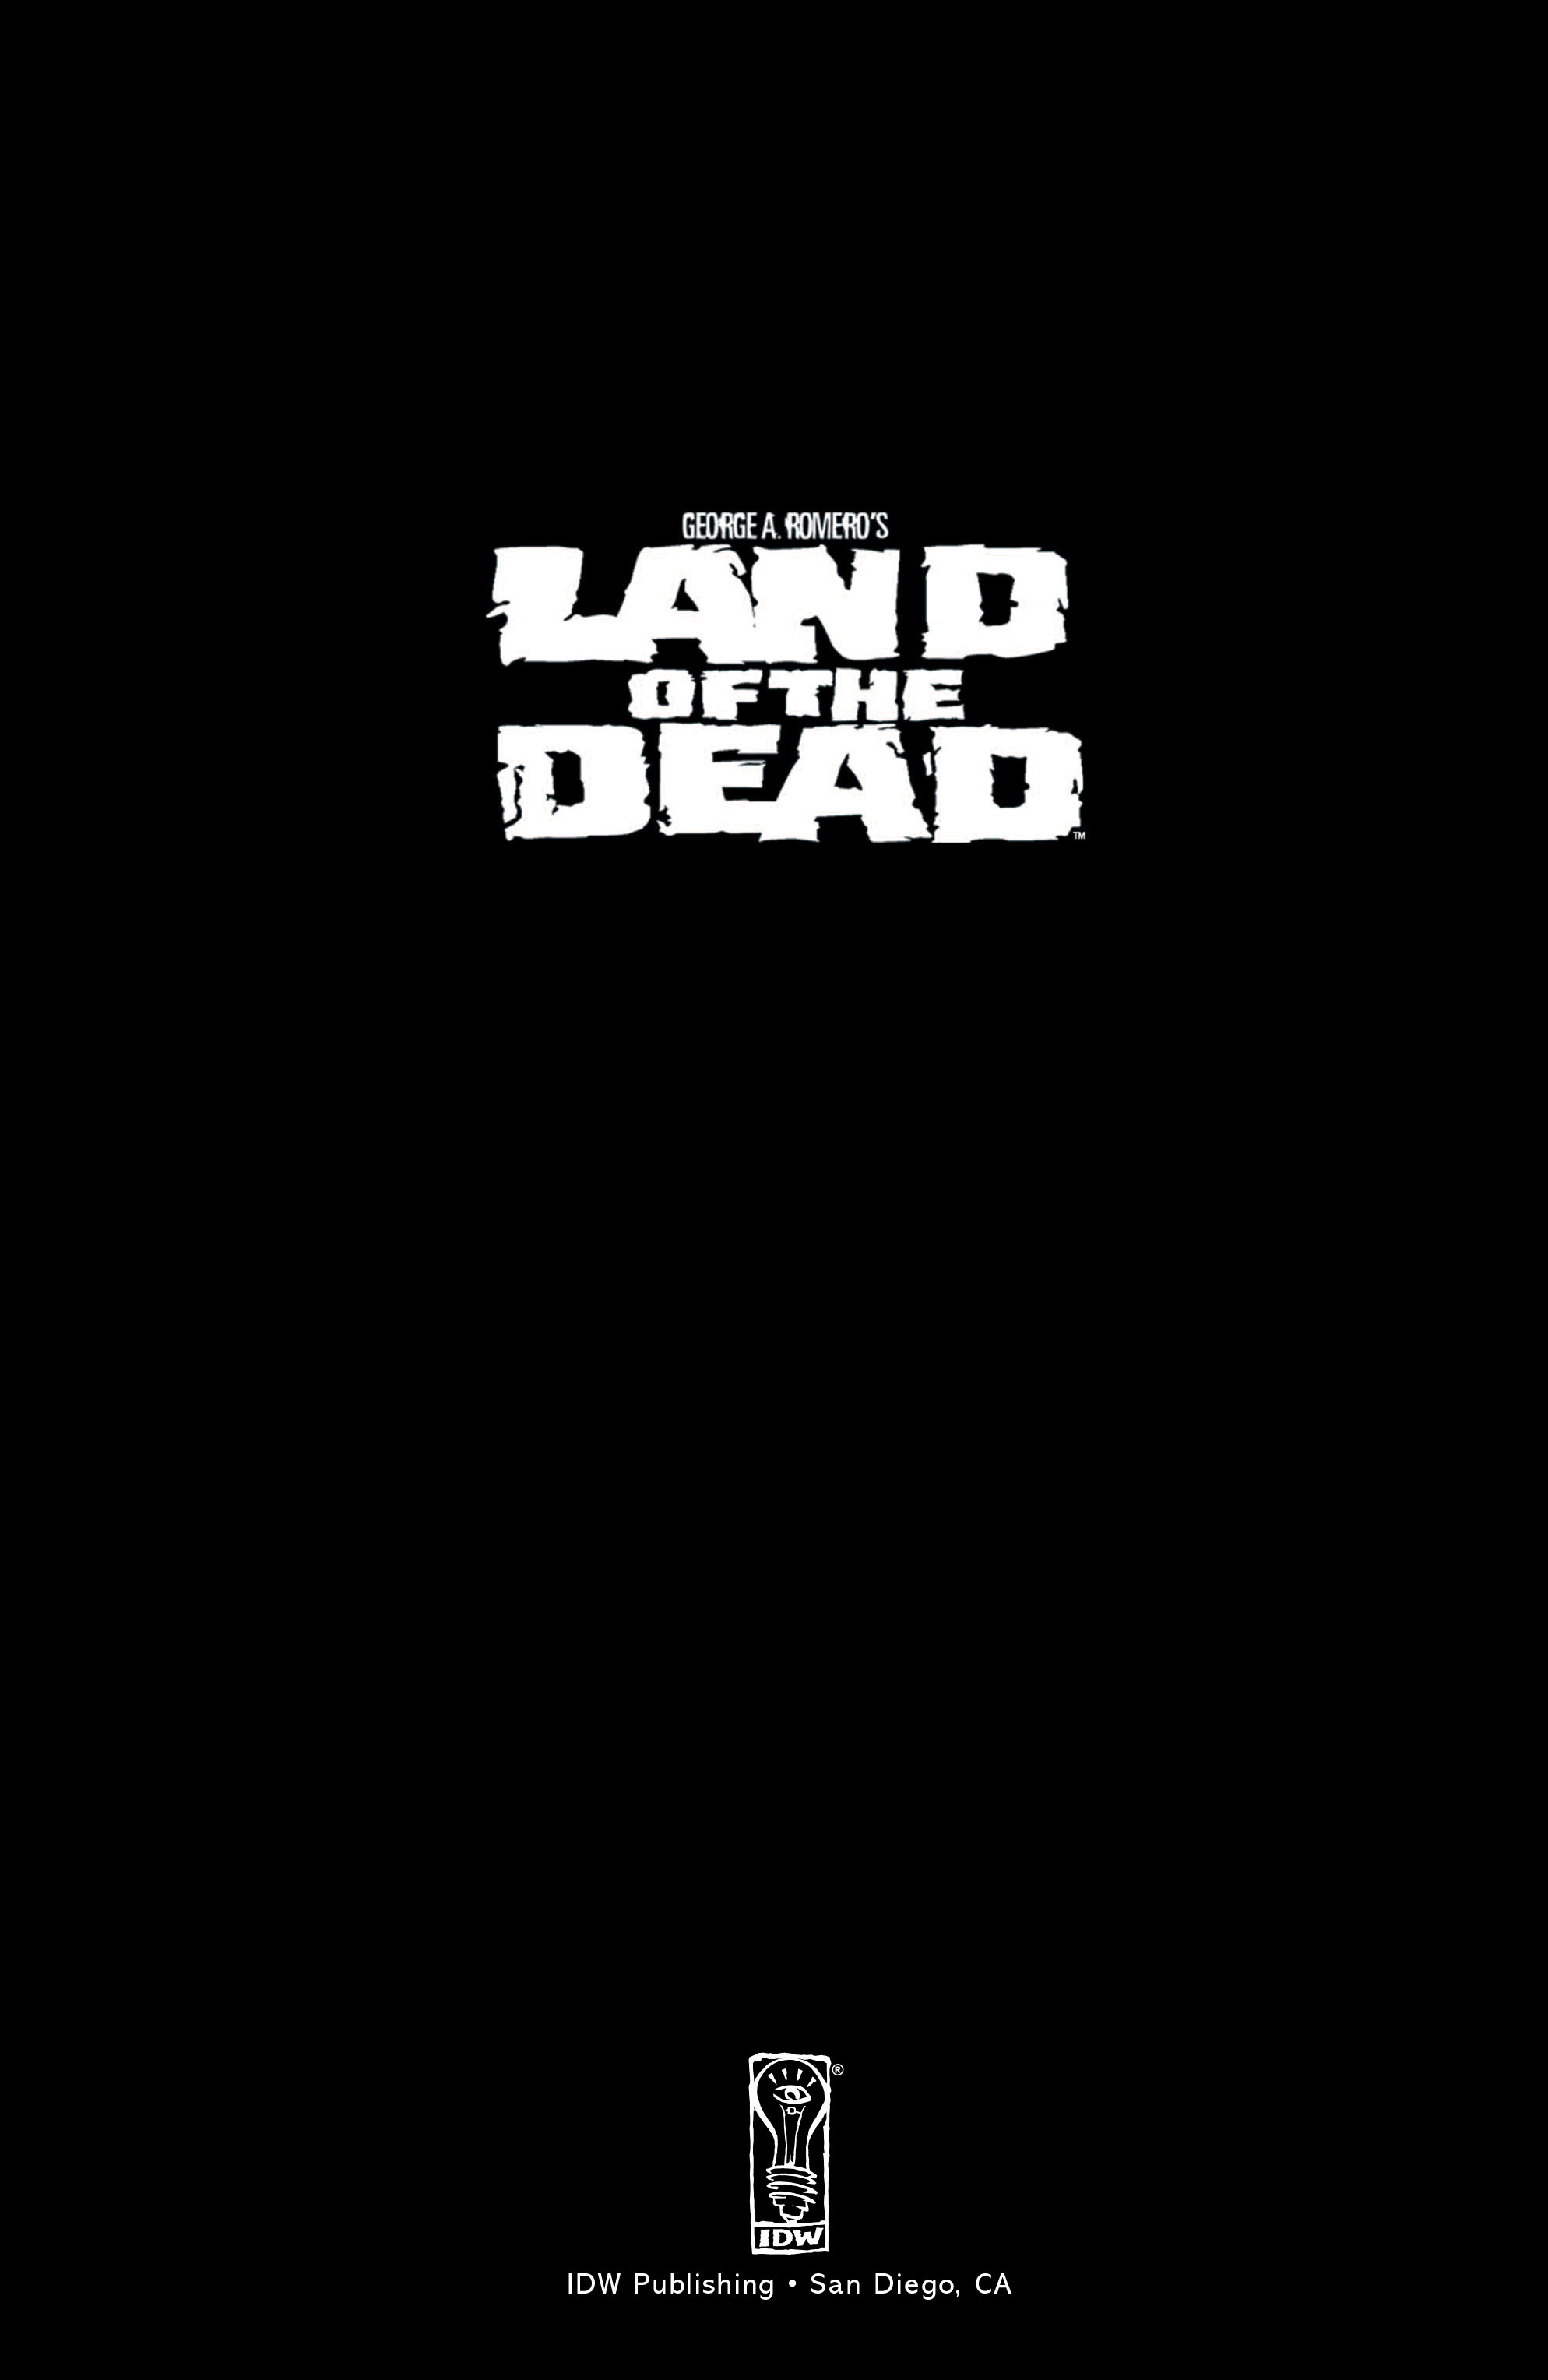 Read online Land of the Dead comic -  Issue # TPB - 2